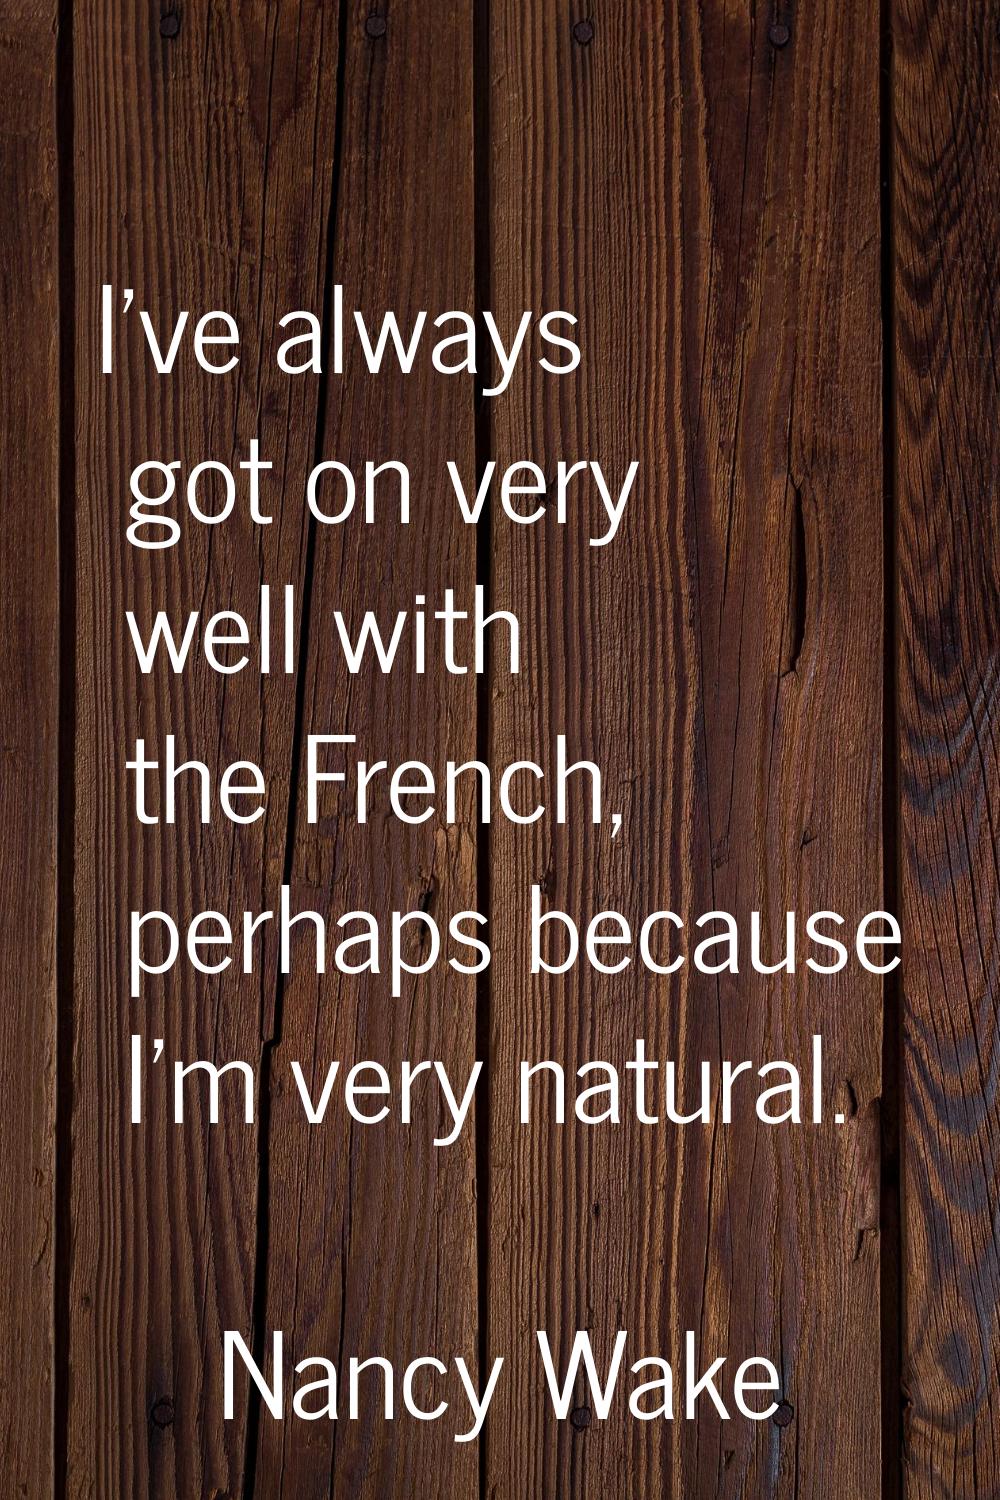 I've always got on very well with the French, perhaps because I'm very natural.